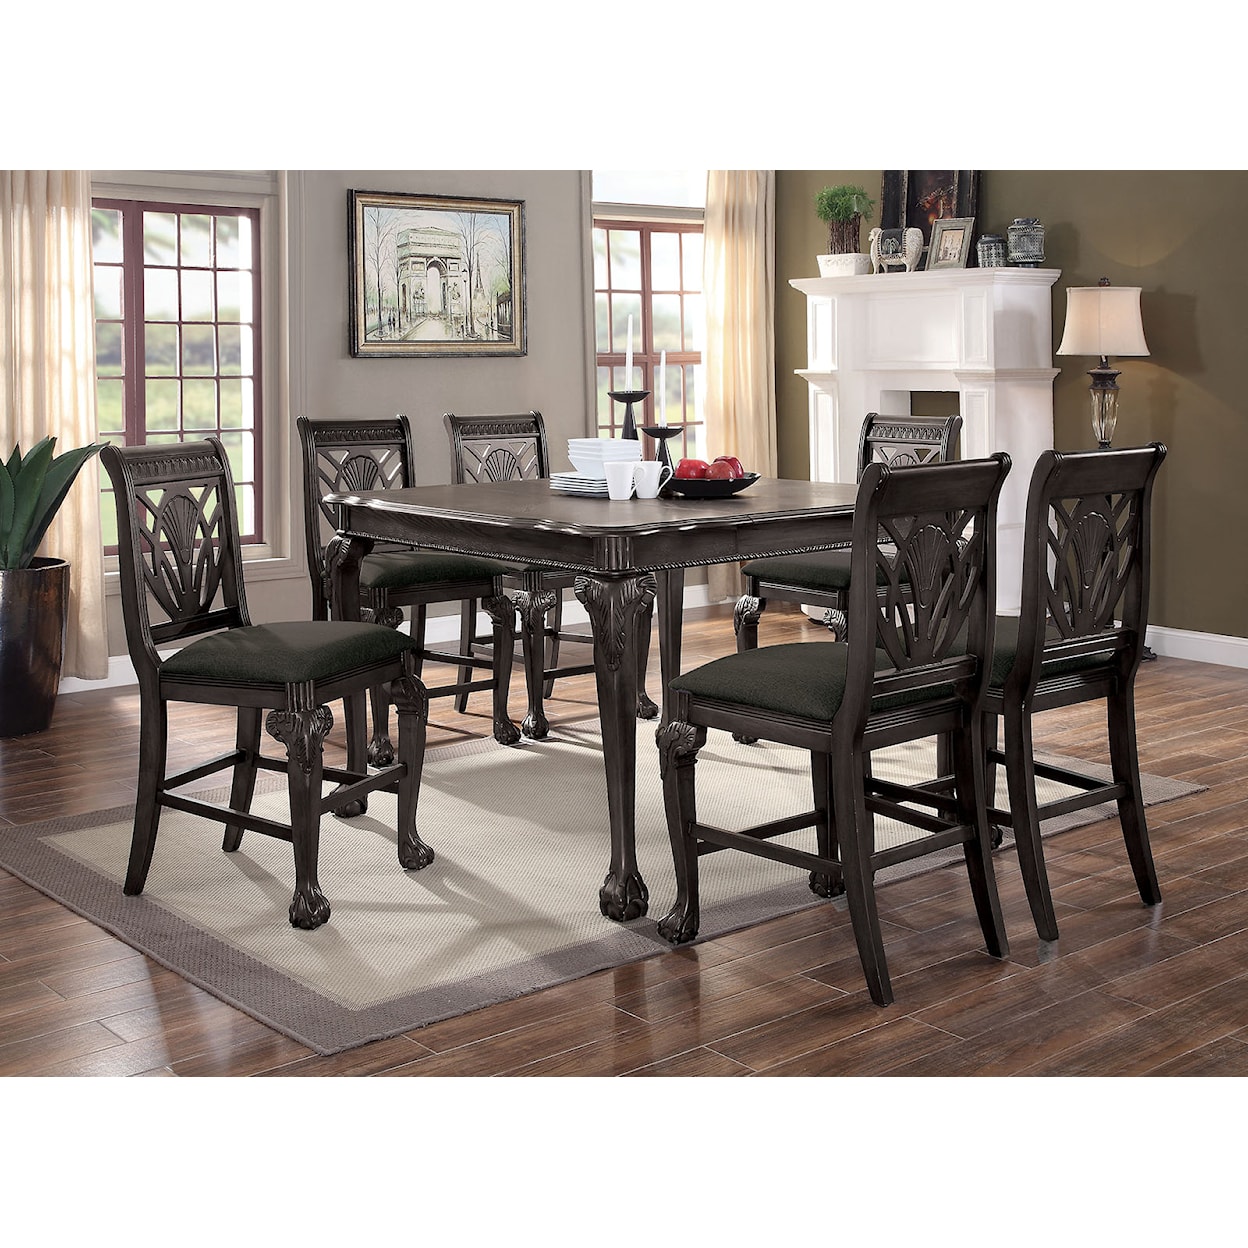 Furniture of America Petersburg 7-Piece Counter Height Dining Table Set